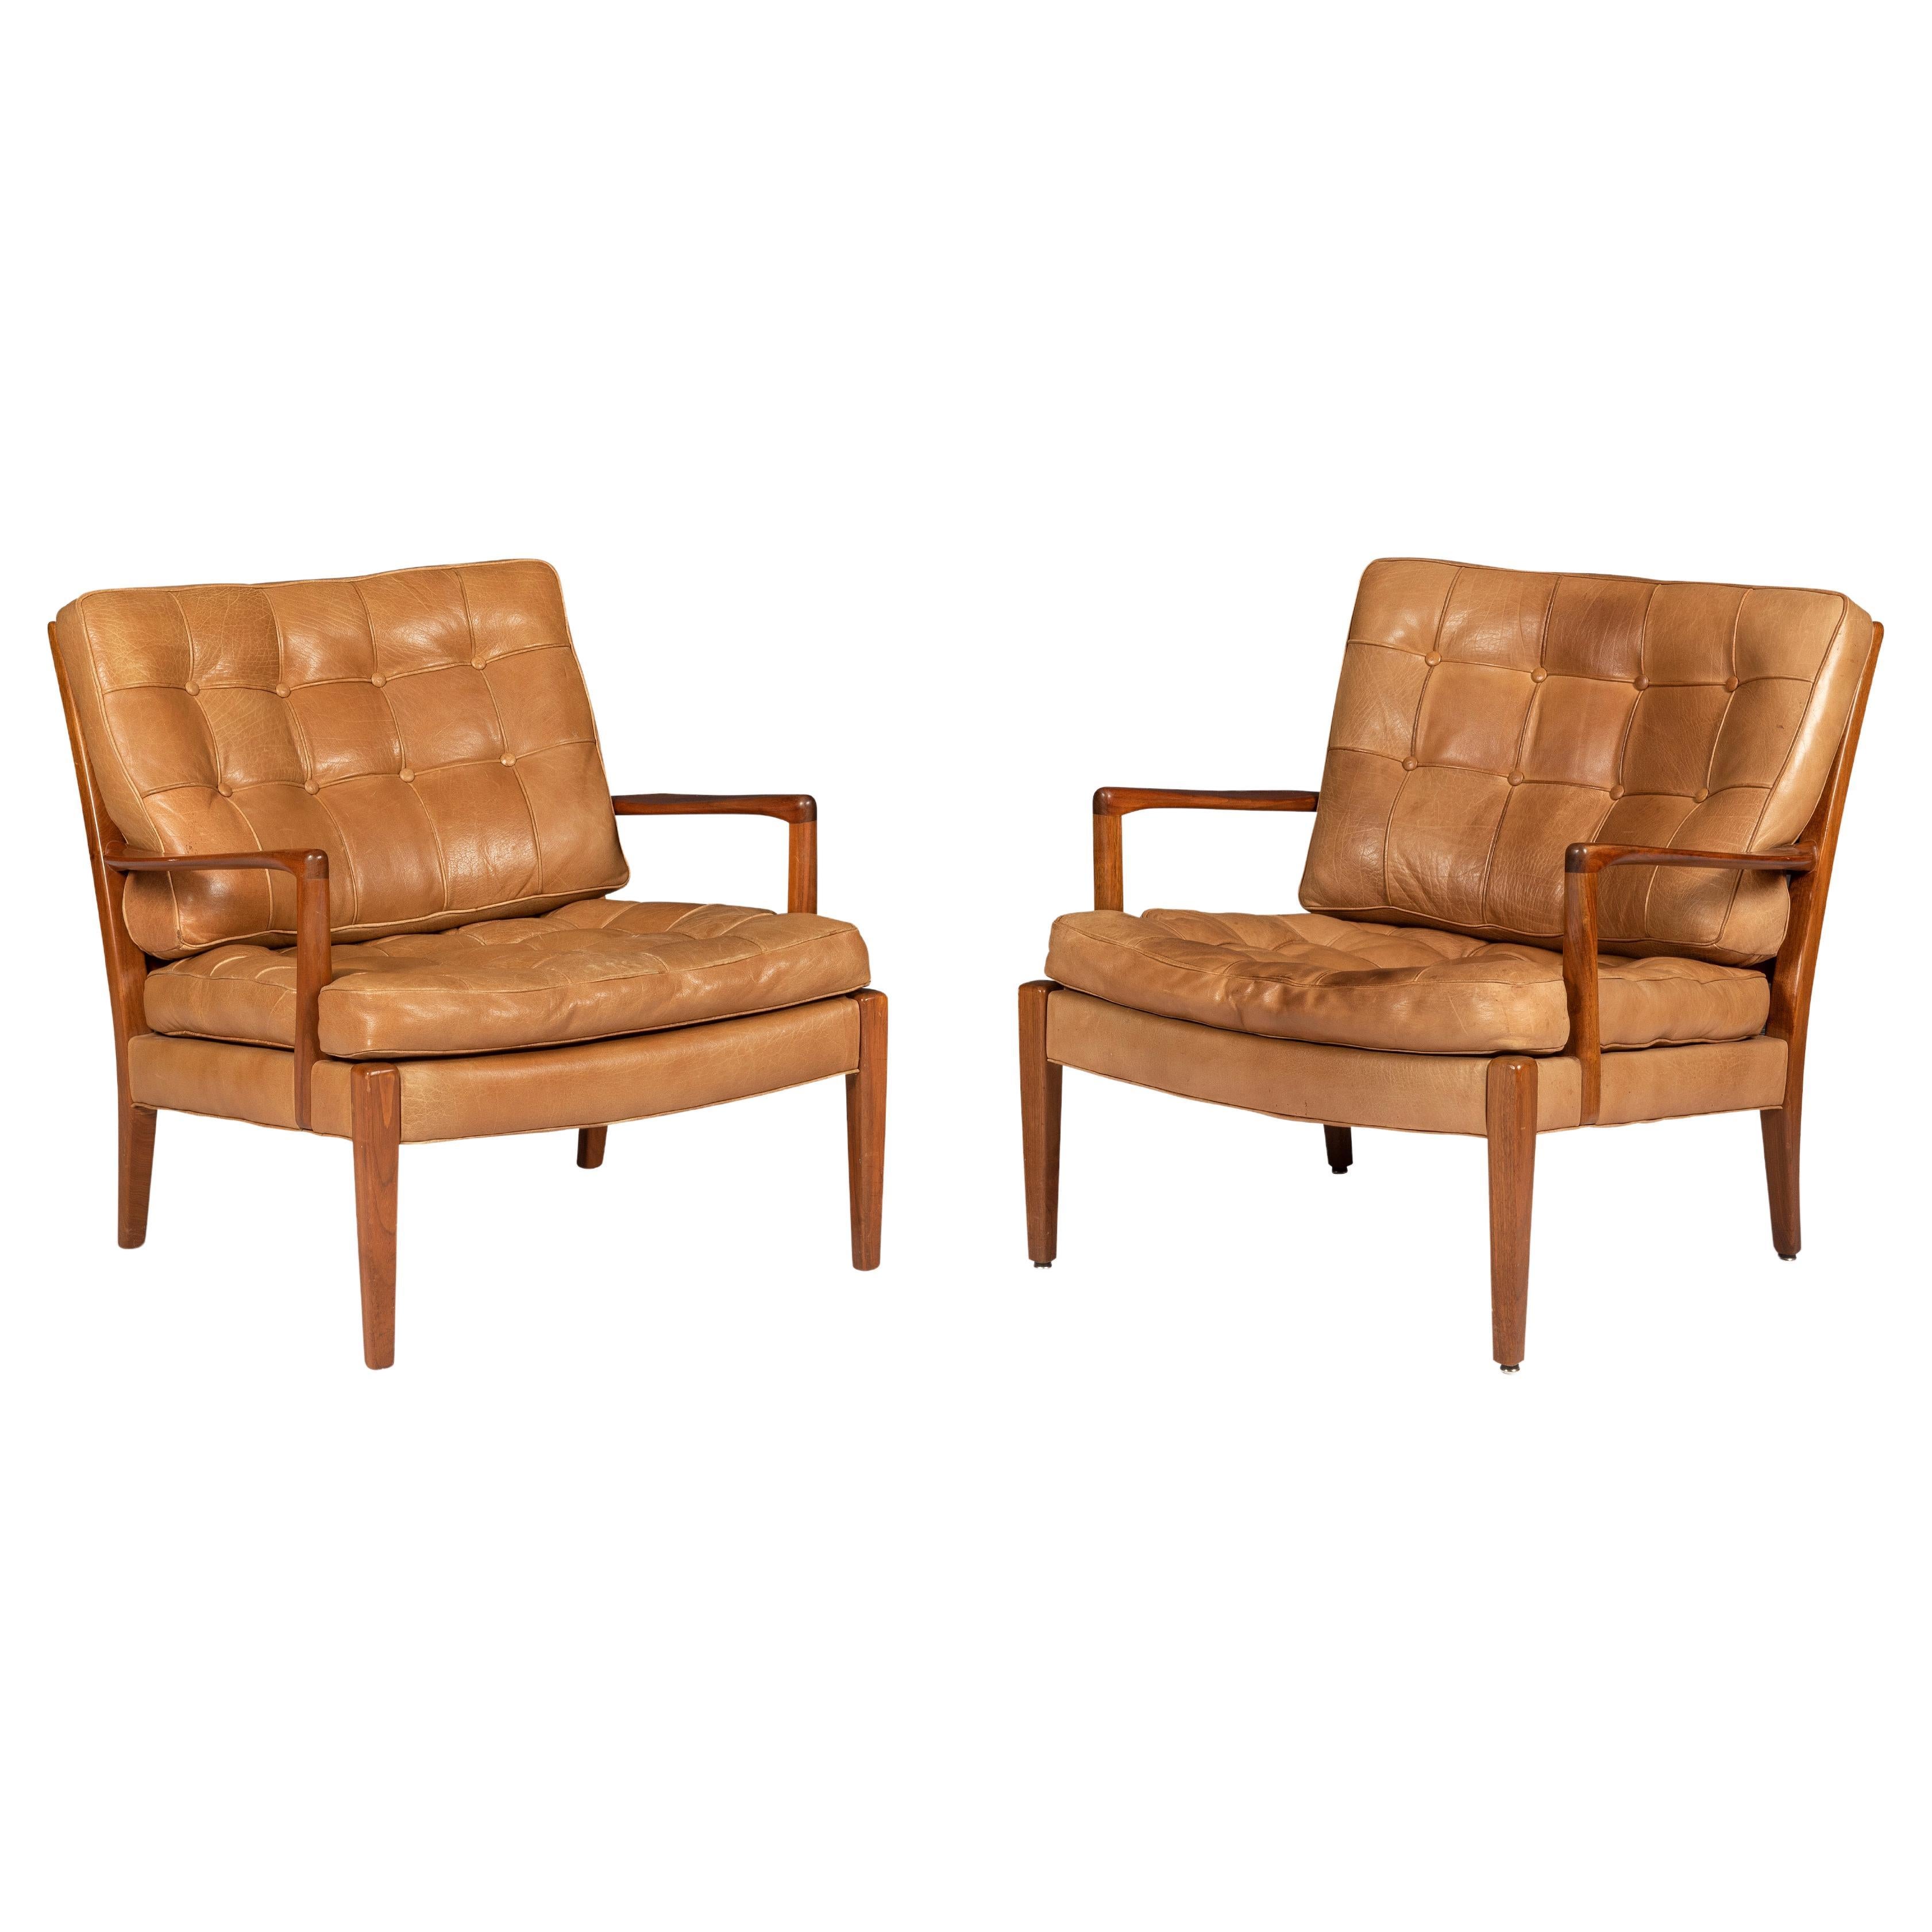 Arne Norell "Löven" Pair of Easy Arm Chair in Walnut and Leather, Swedish 1960s For Sale